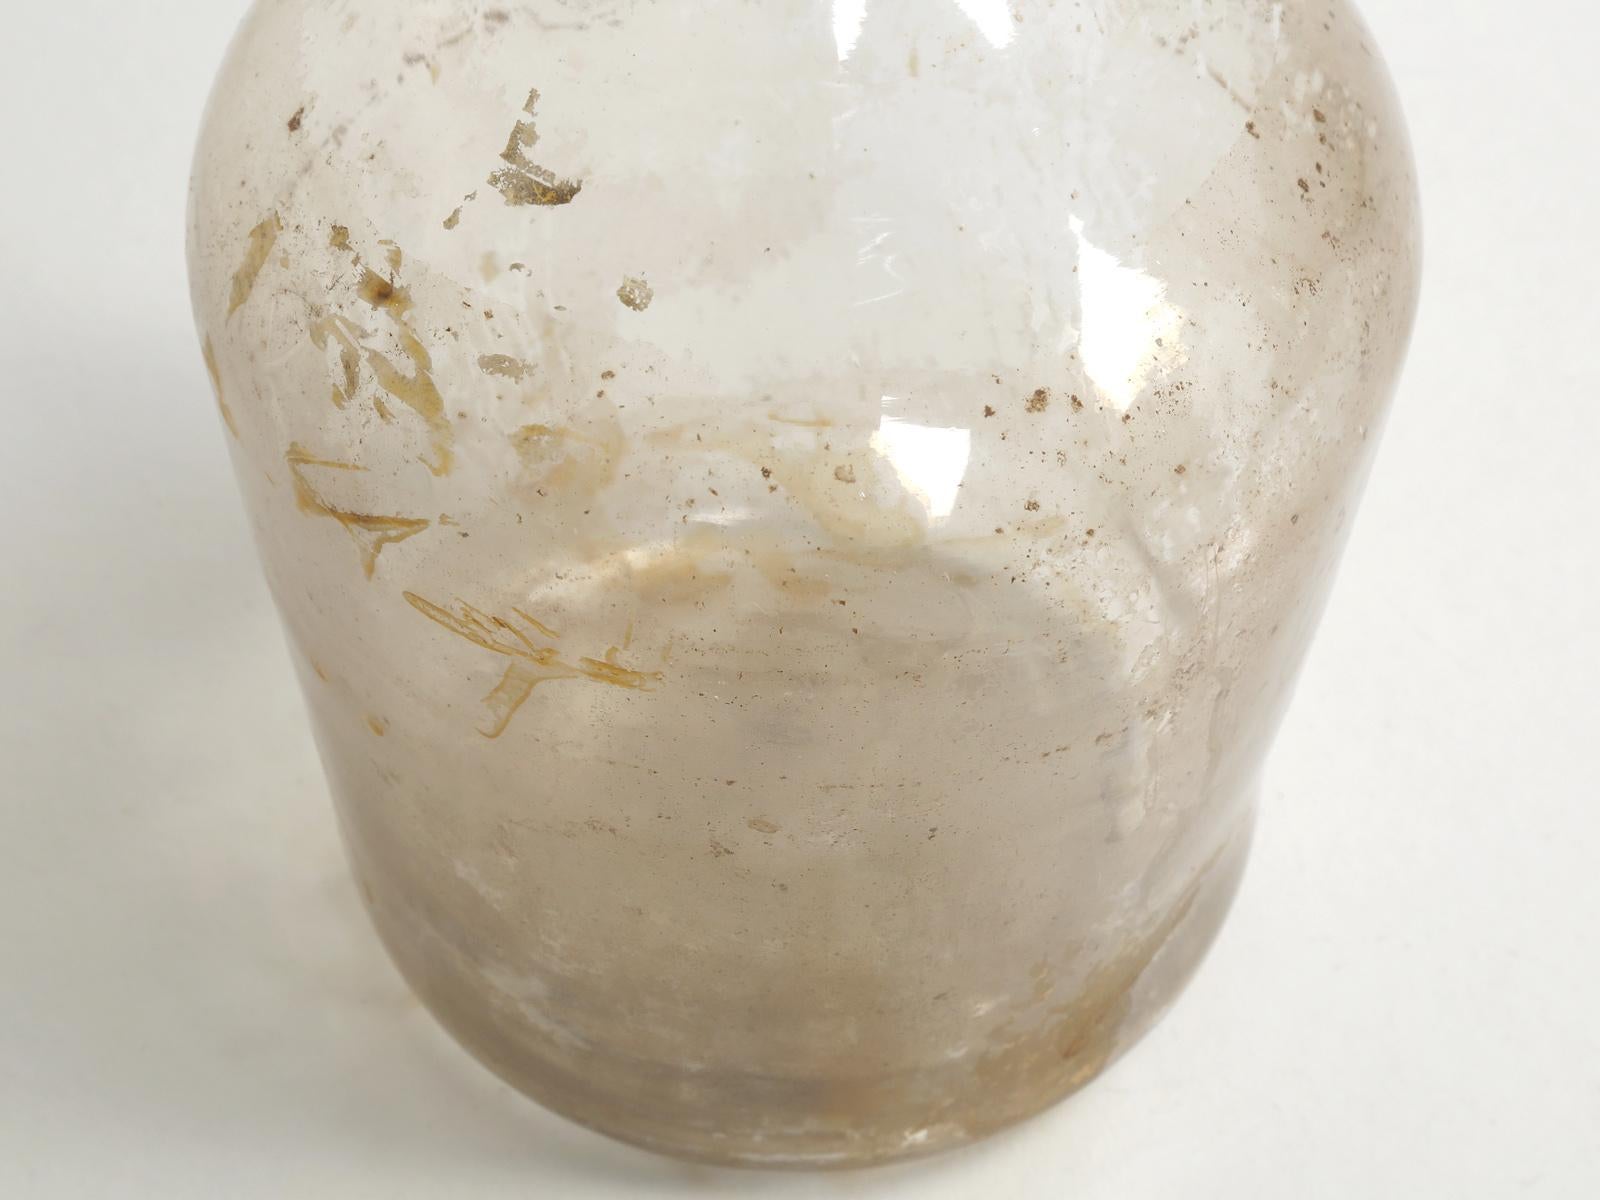 French Antique Demijohn or Carboy